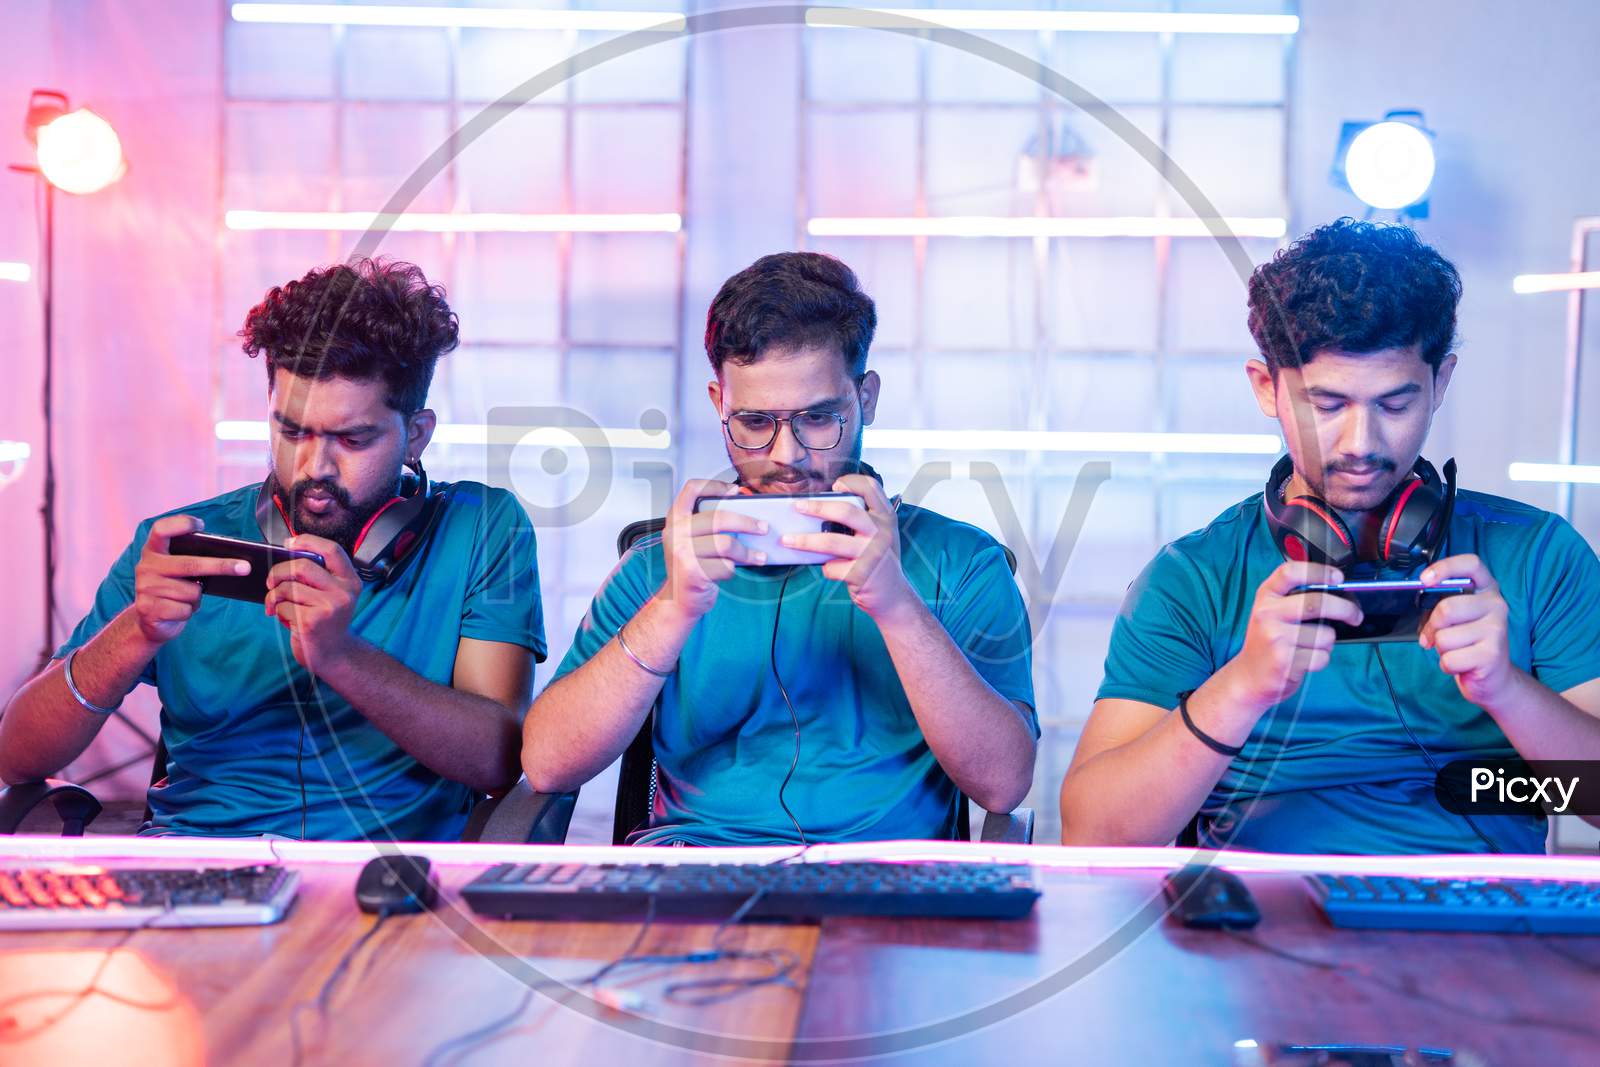 Front View Of Team Of Young Professional Gamers Seriously Playing Of Live Video Game On Mobile Phone At Esports Tournament.